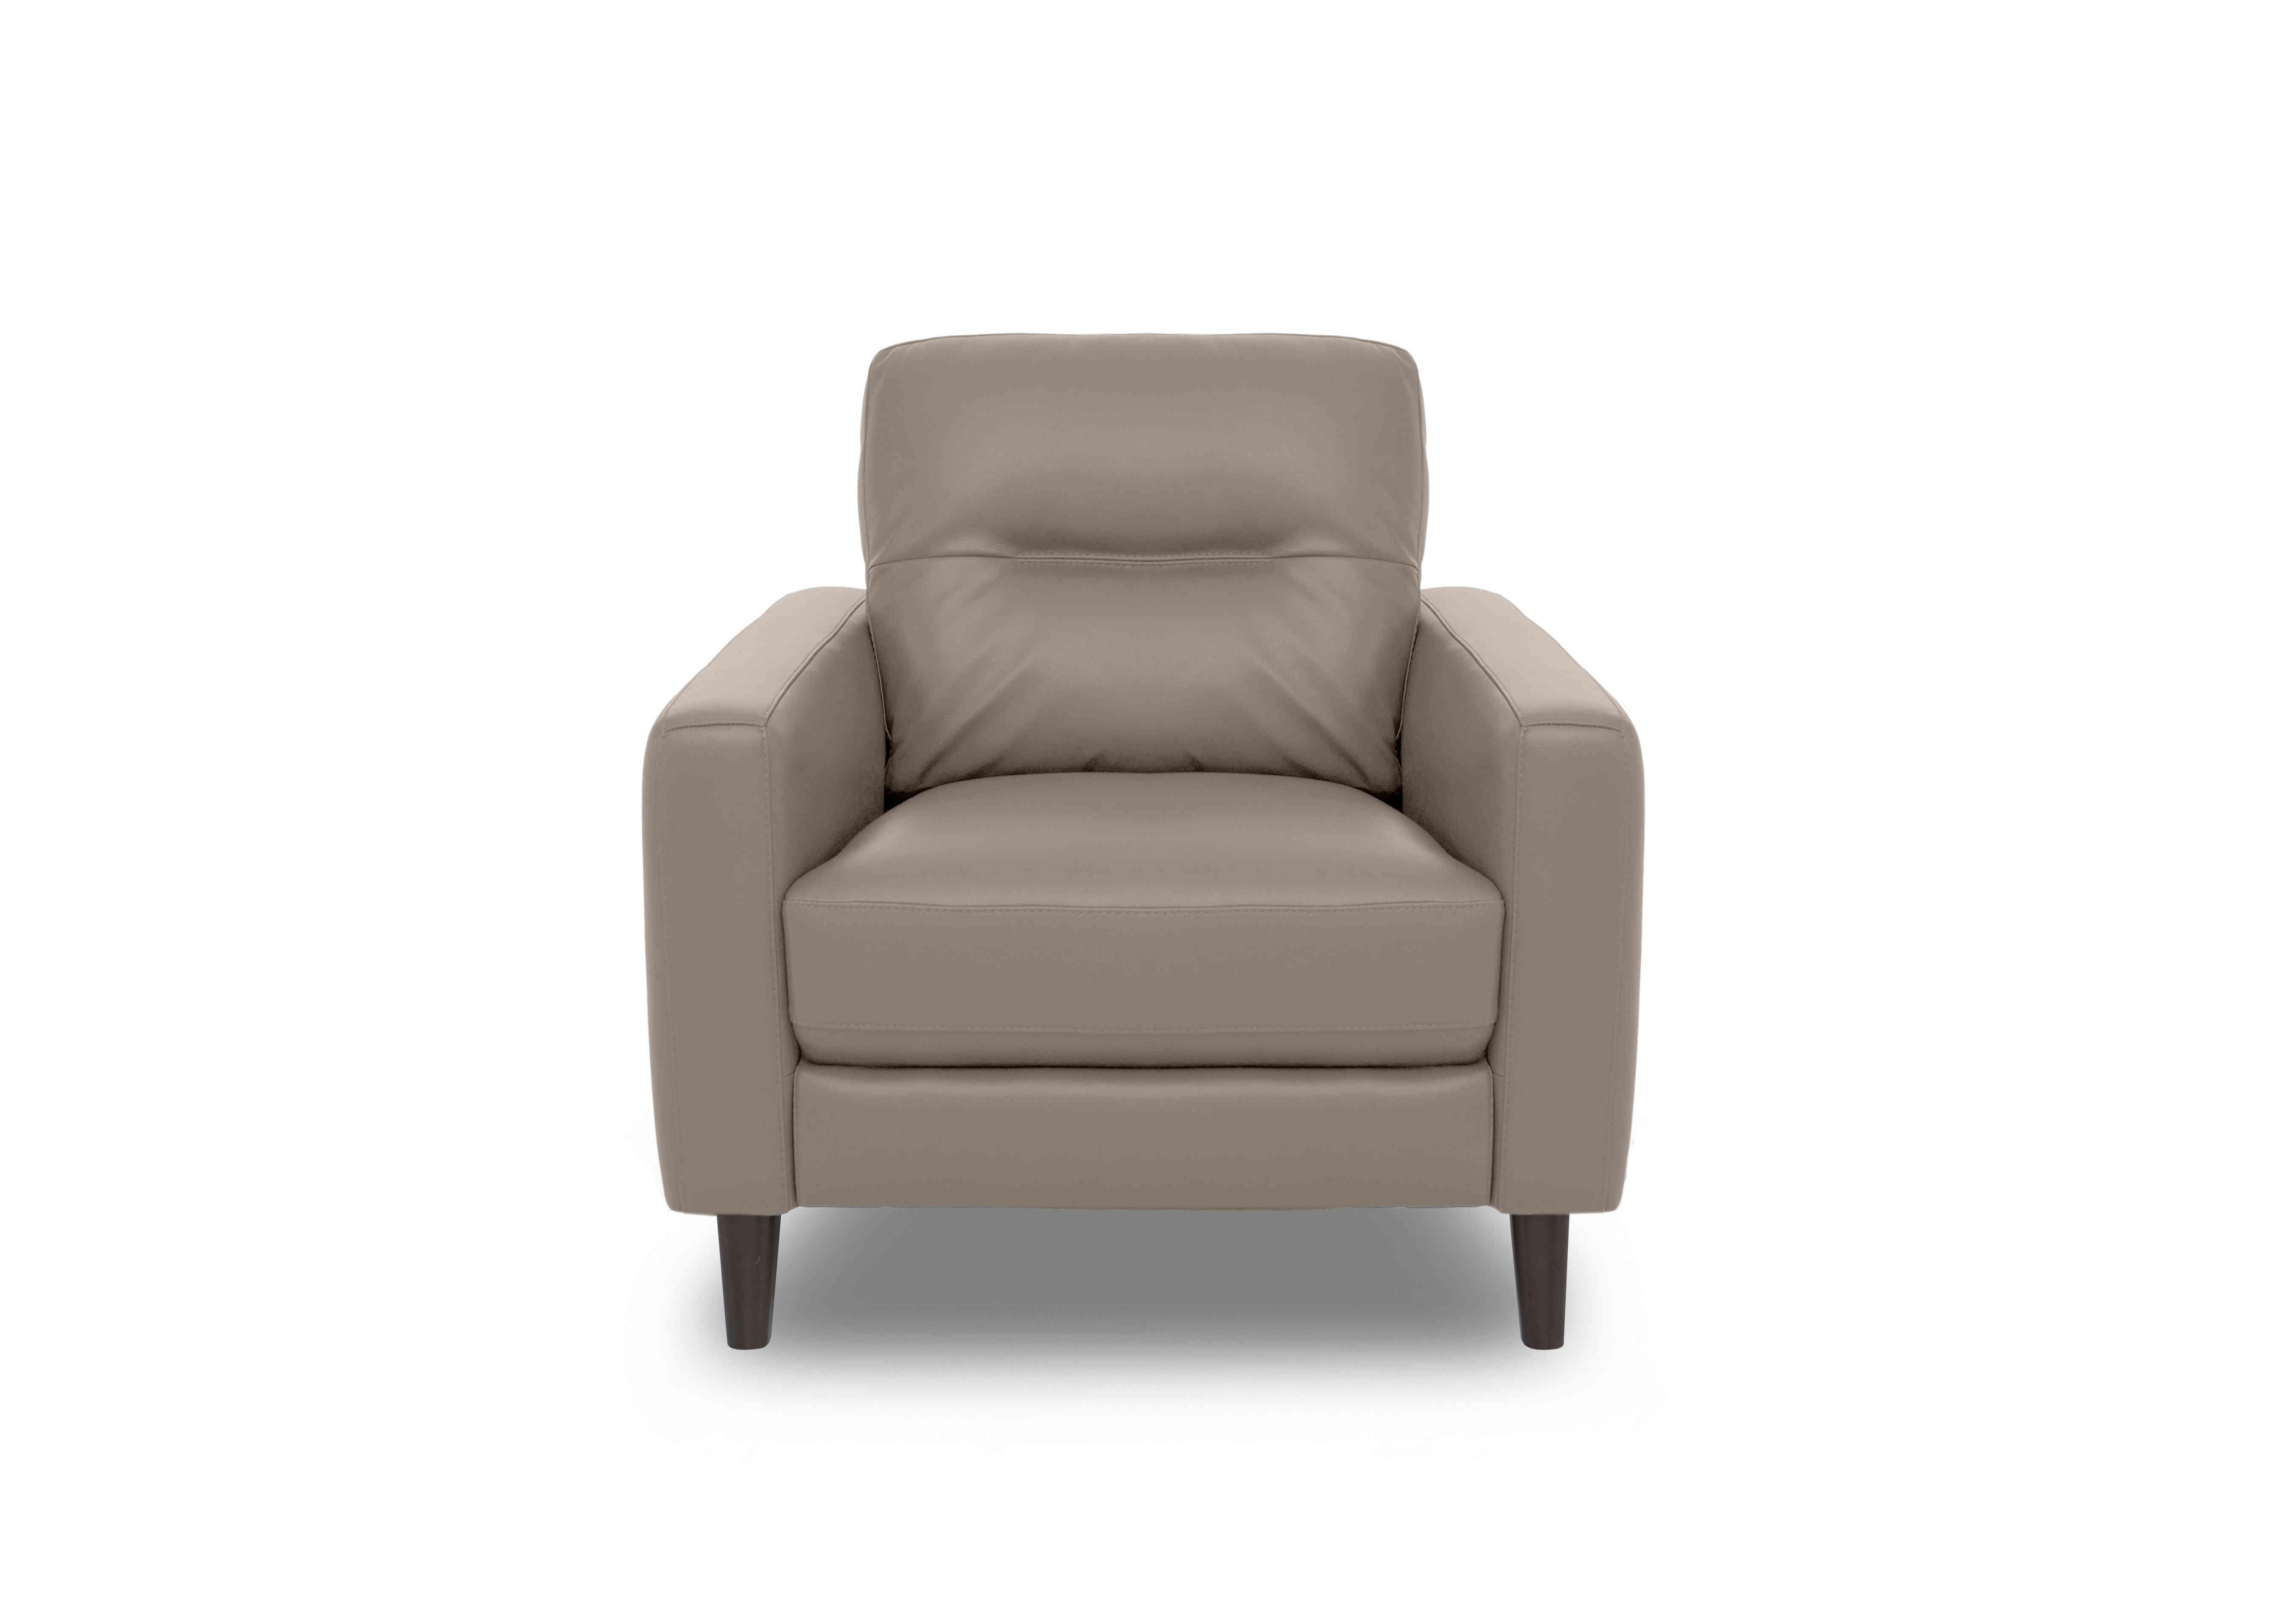 Jules Leather Chair in An-946b Silver Grey on Furniture Village